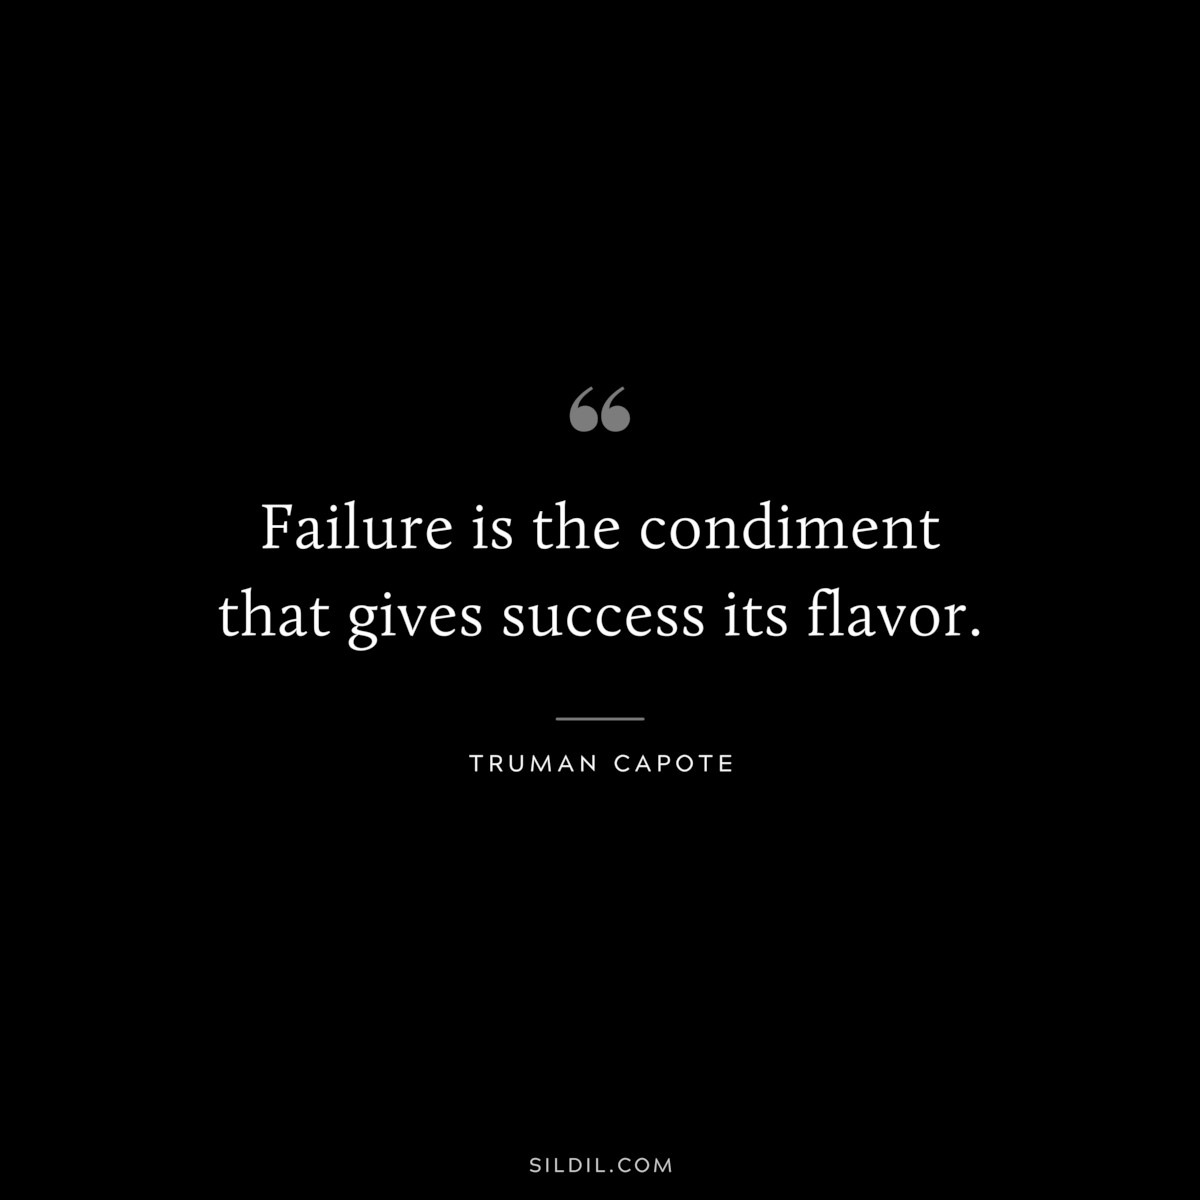 Failure is the condiment that gives success its flavor. ― Truman Capote